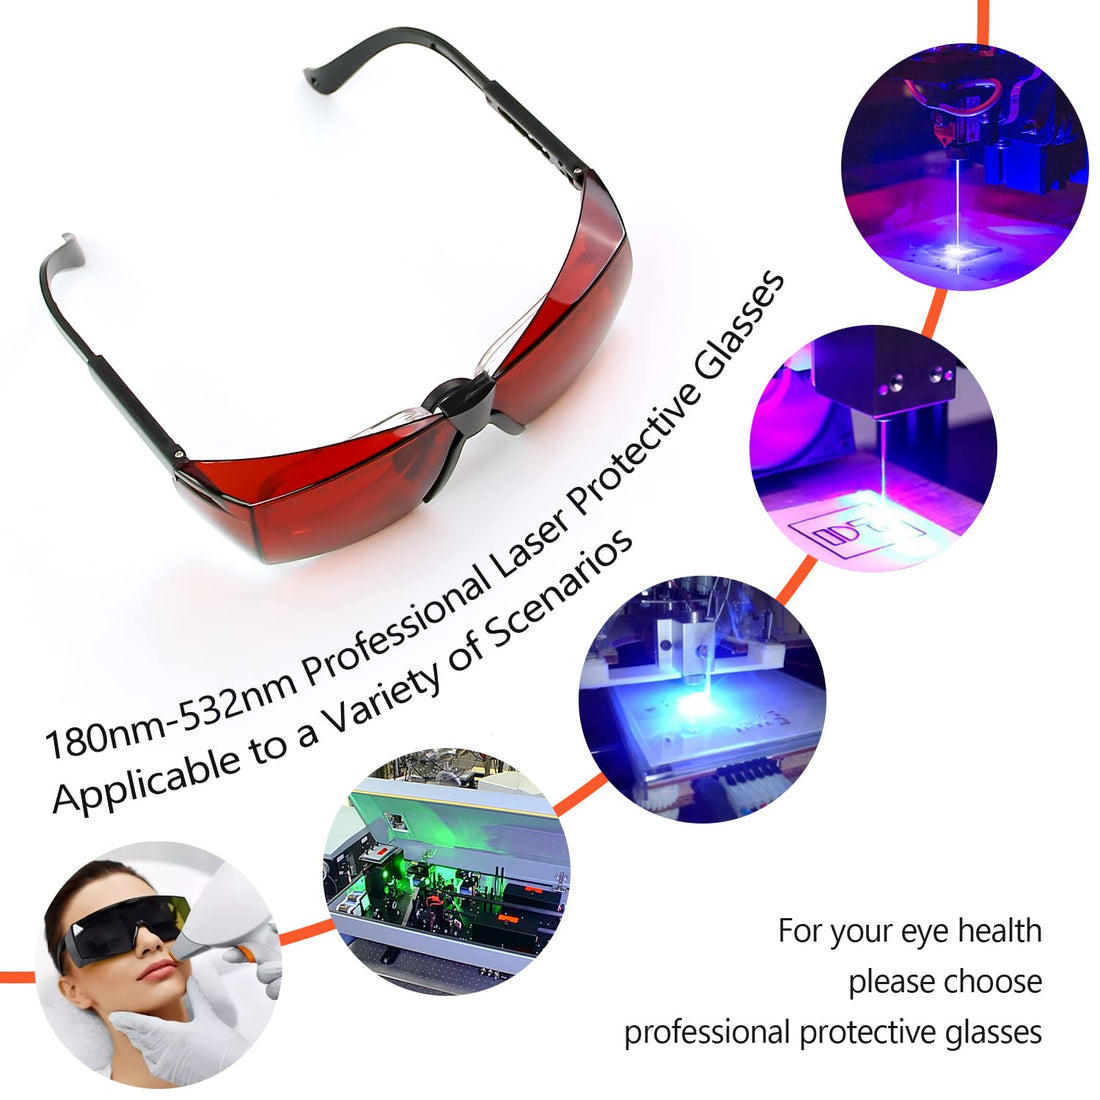 Wavelength 180nm-540nm Laser Safety Glasses for 405nm, 445nm, 450nm,520nm,532nm Laser Light ,Yag, Blue, Green Laser and UV Light Eye Protection Fit Dazzling Lasers, Like Engraving Machines